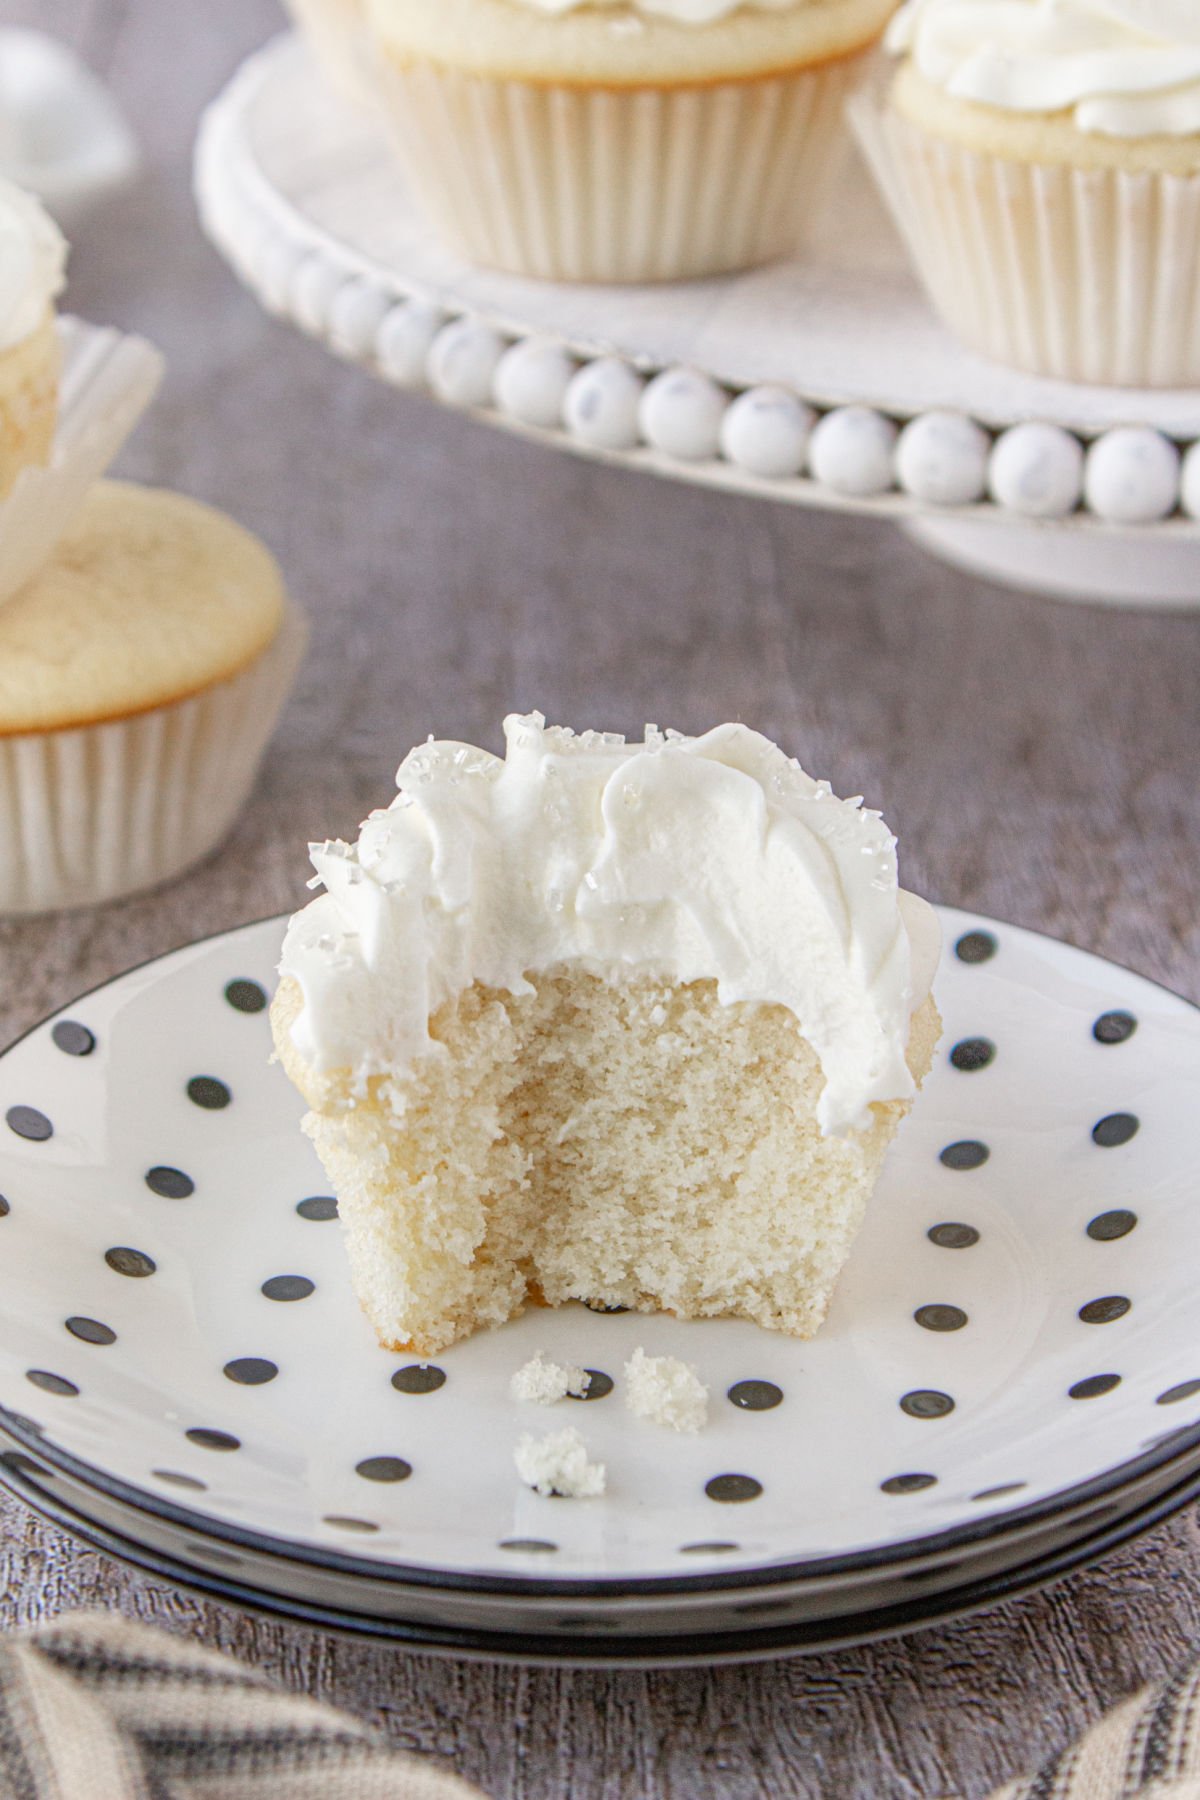 A white cupcake with a bite removed showing the interior.